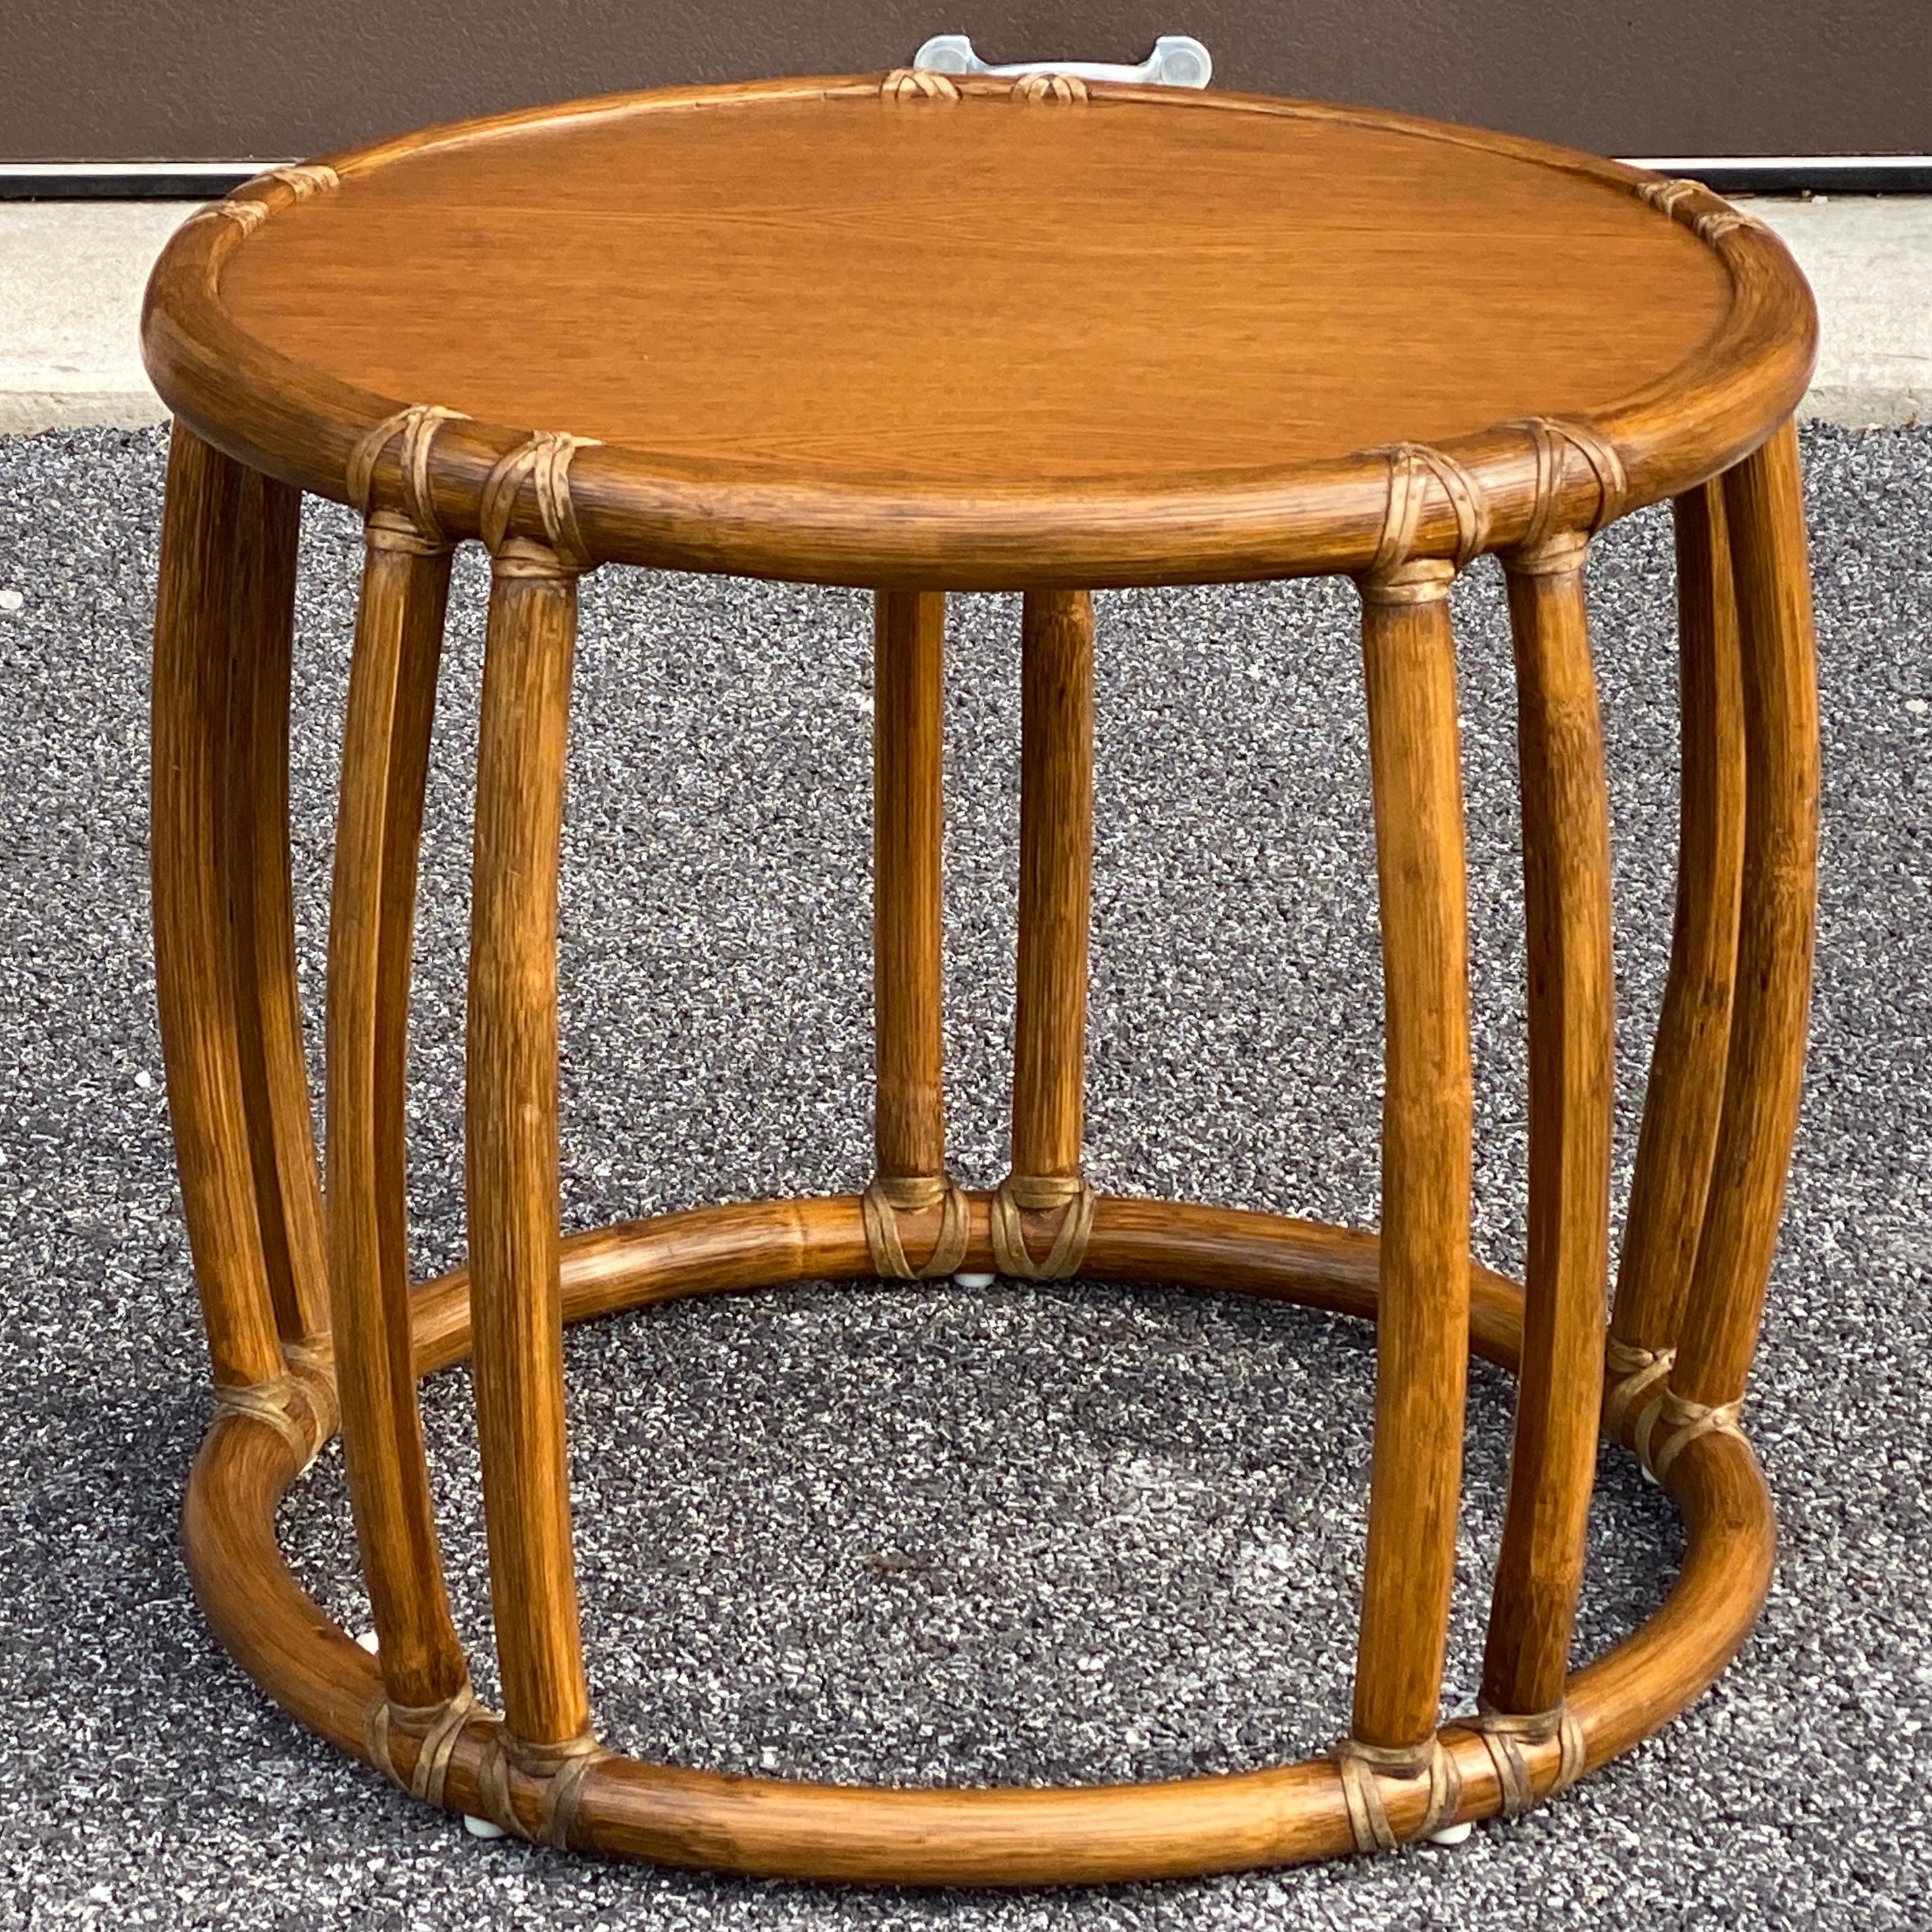 A genuine McGuire taboret table with the signature leather wrapped joints and original metal tag underneath. Interior table surface 21.5” diameter. On page 34 of the McGuire Furniture Portfolio this piece is identified as Model 95X Lamp Table. The